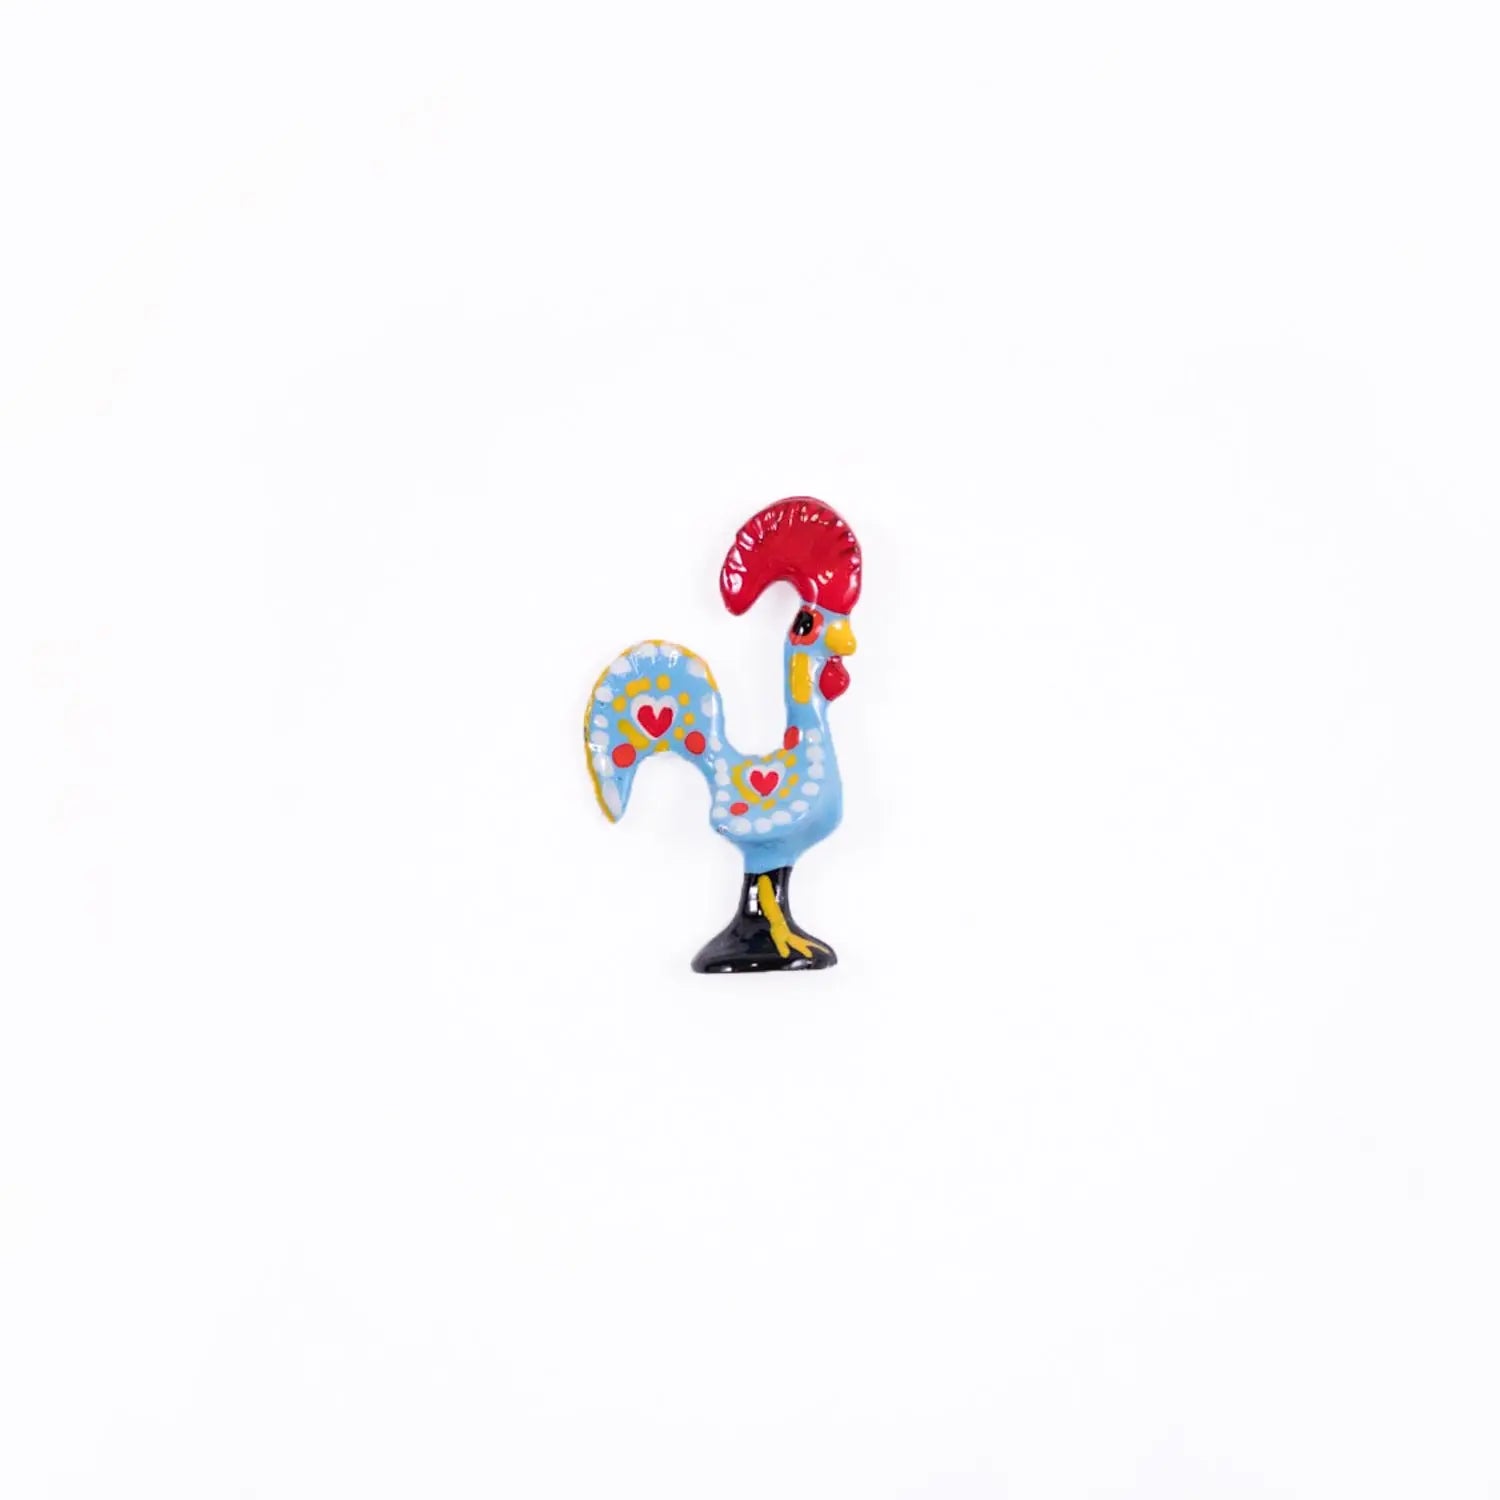 Portuguese Inspired Barcelos Rooster Lapel Pin in Blue-Rooster Camisa